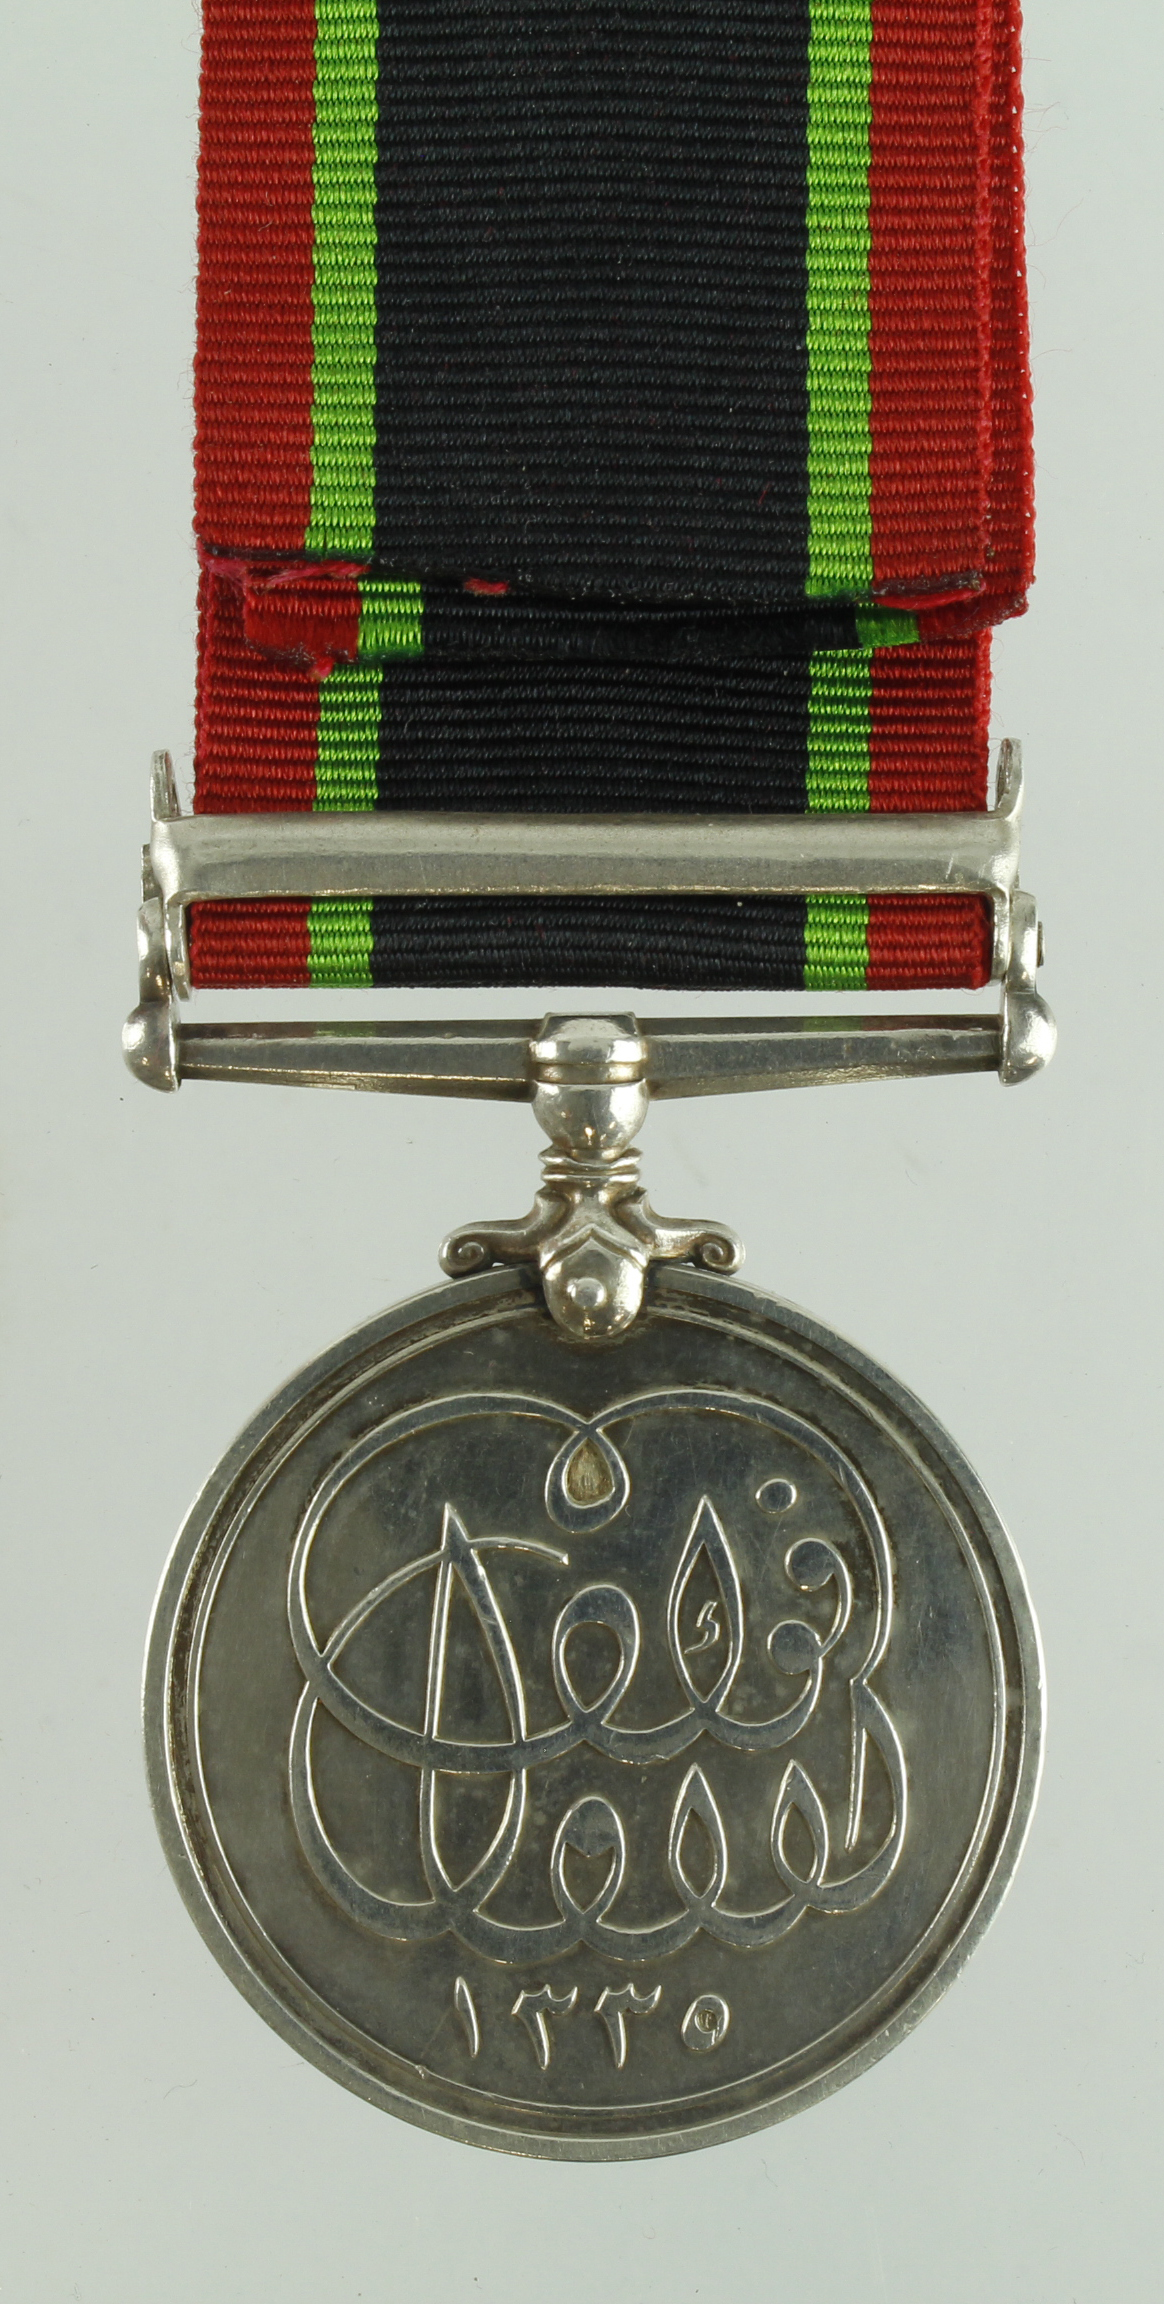 Khedives Sudan Medal 1910 with Mandal clasp, unnamed as issued in silver - Bild 2 aus 2